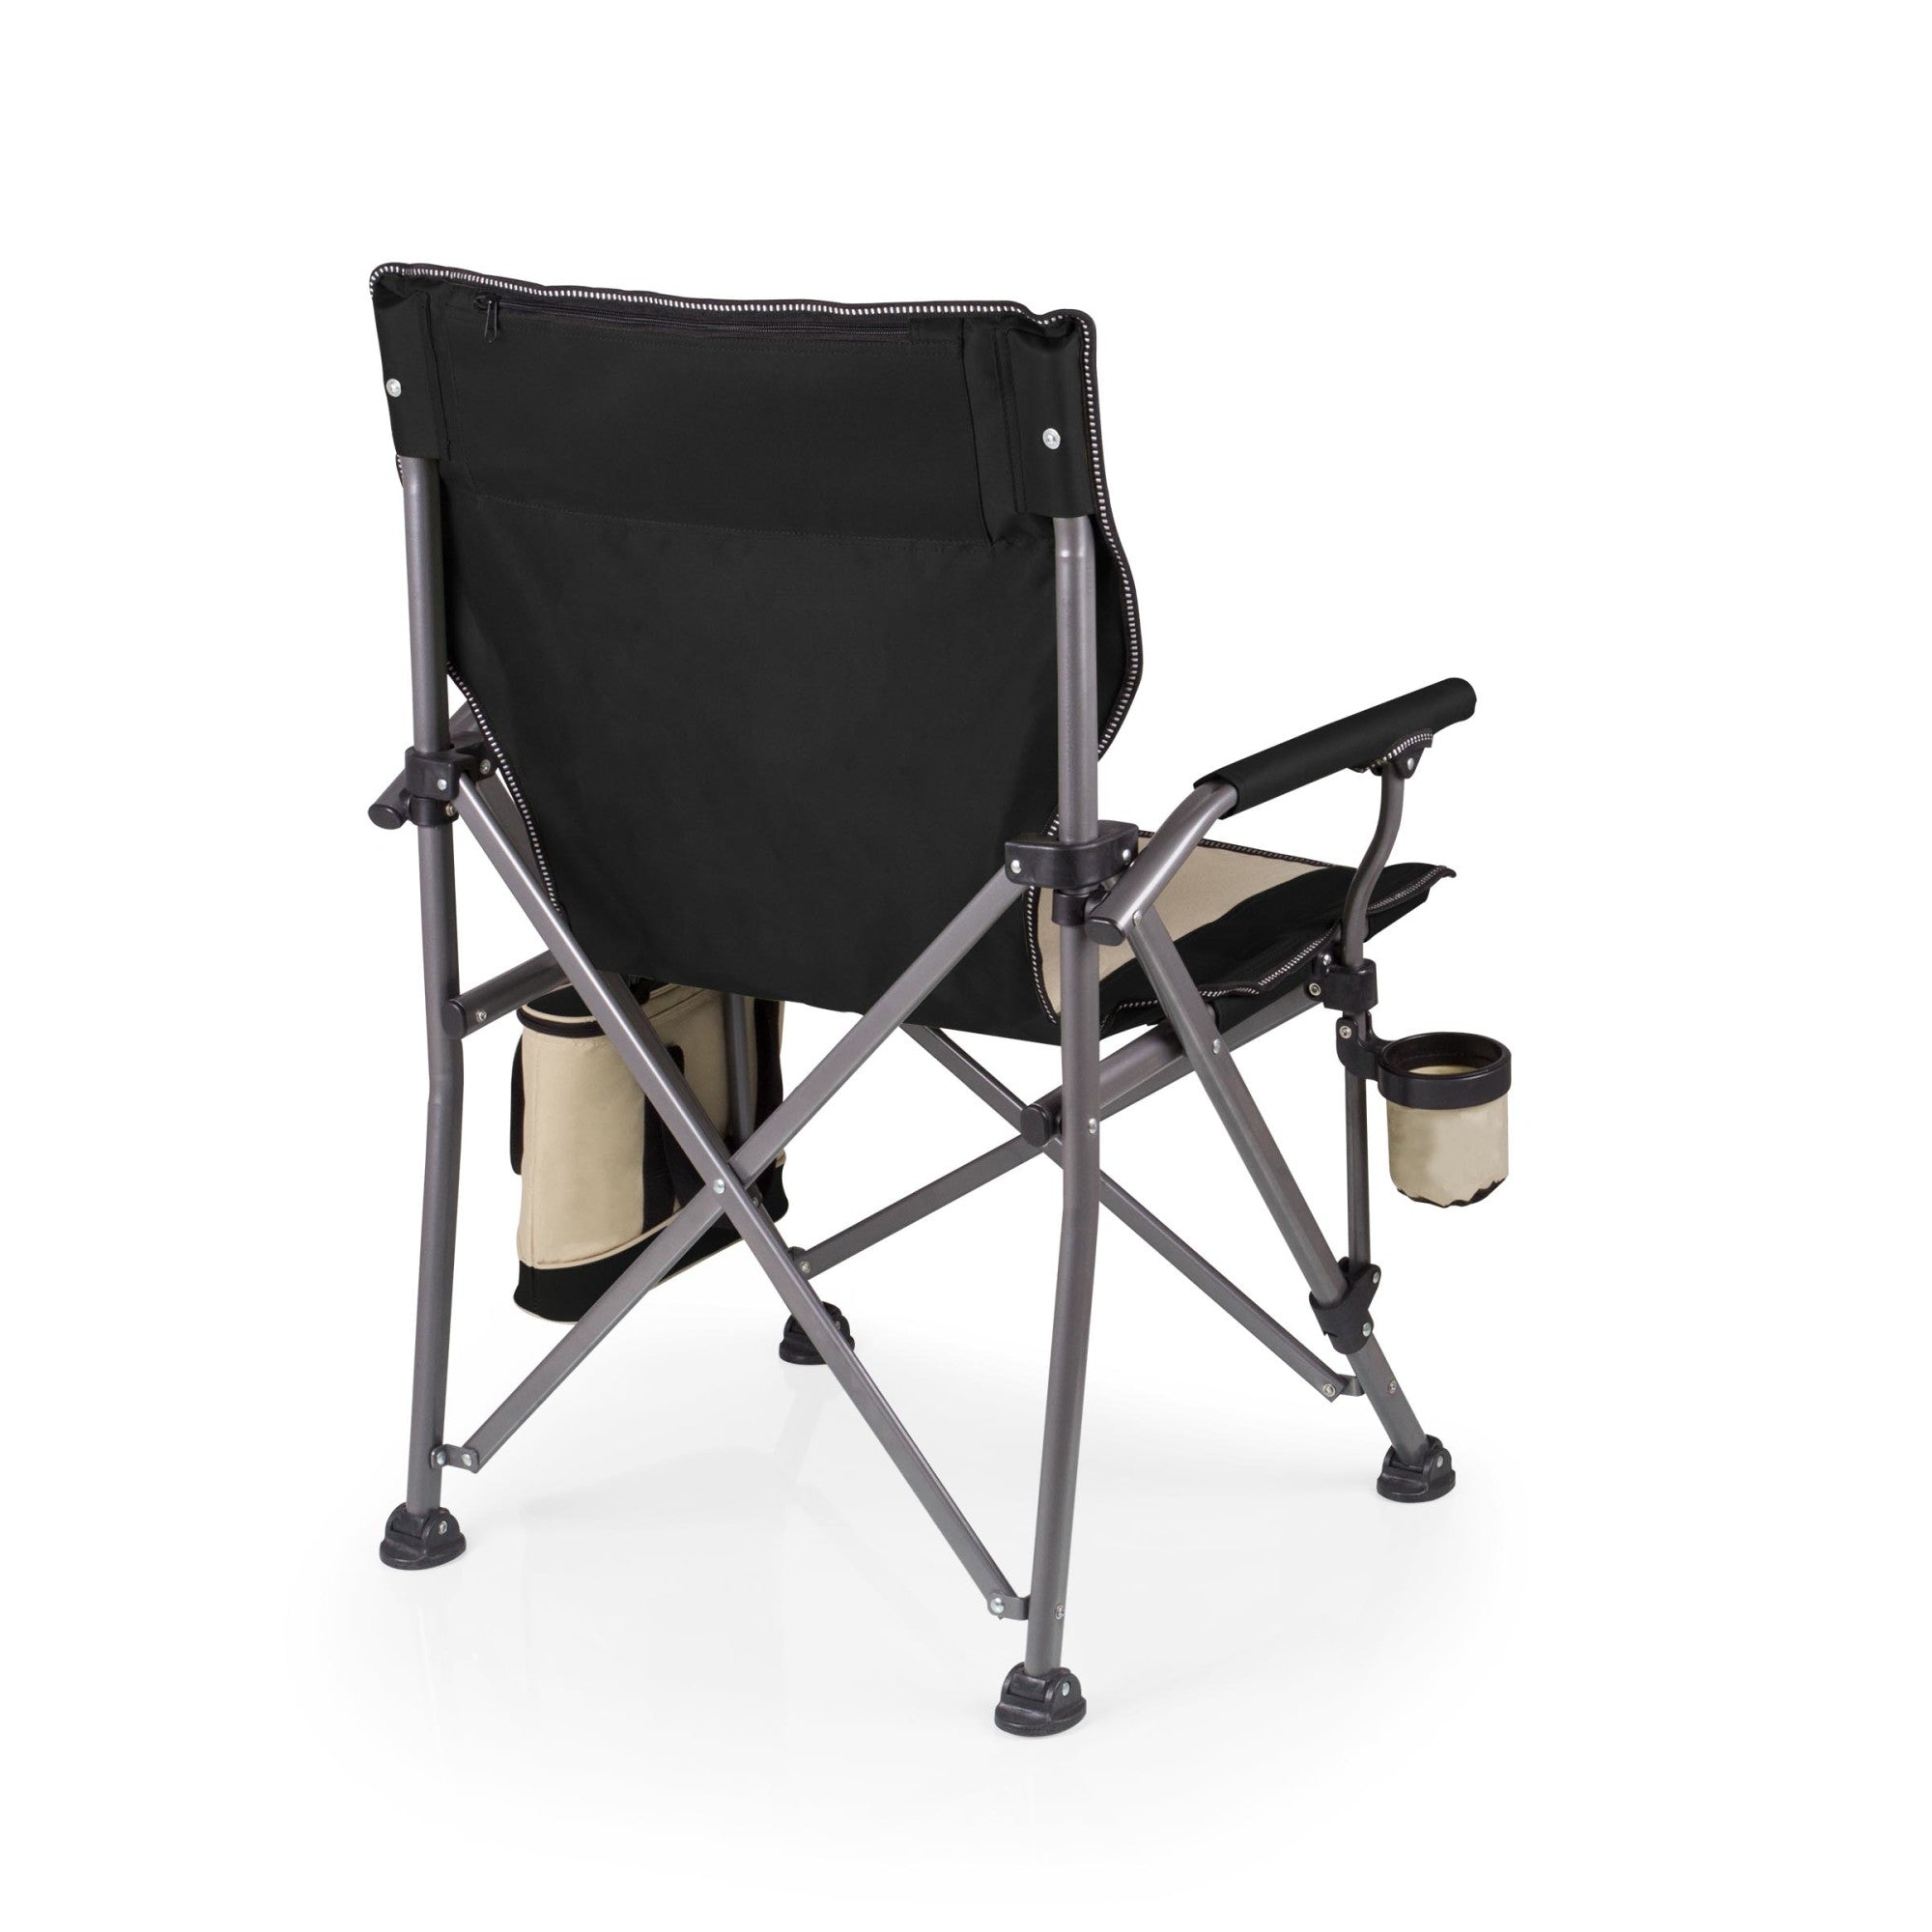 Los Angeles Rams - Outlander XL Camping Chair with Cooler